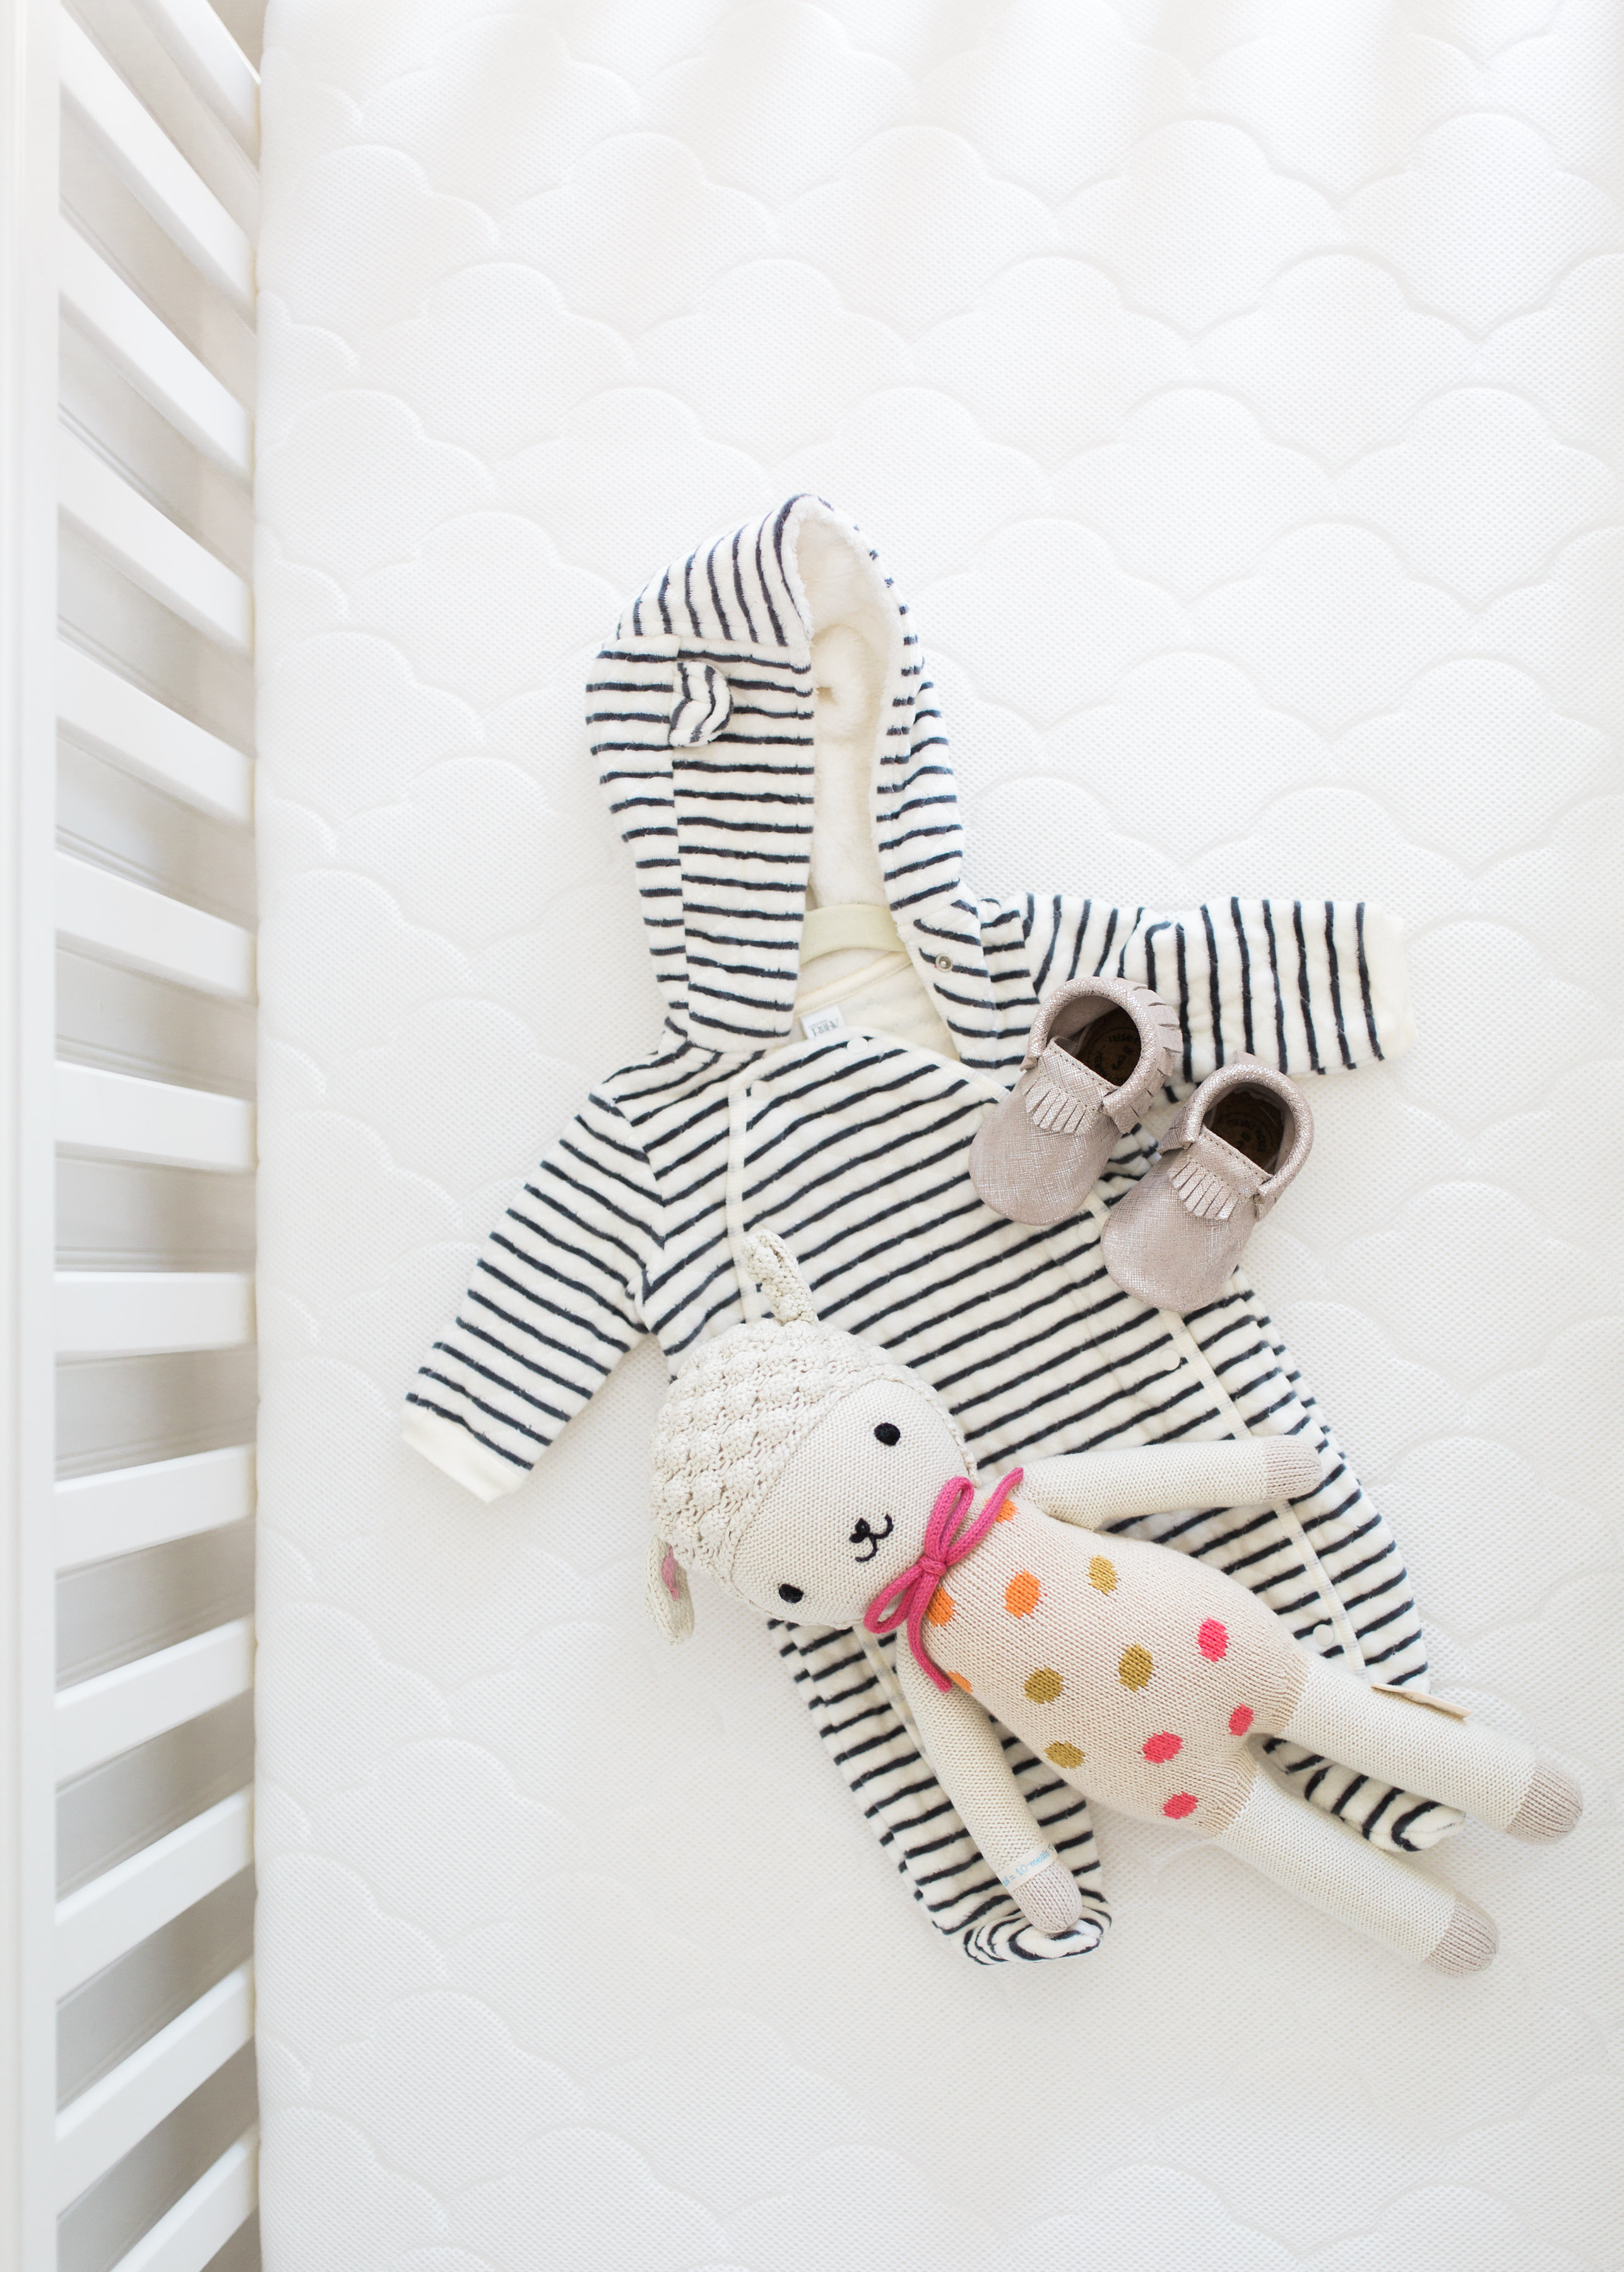 Newton Baby Crib Mattress - Favorites Lately: Newton Baby Crib Mattress by North Carolina style blogger Coffee Beans and Bobby Pins